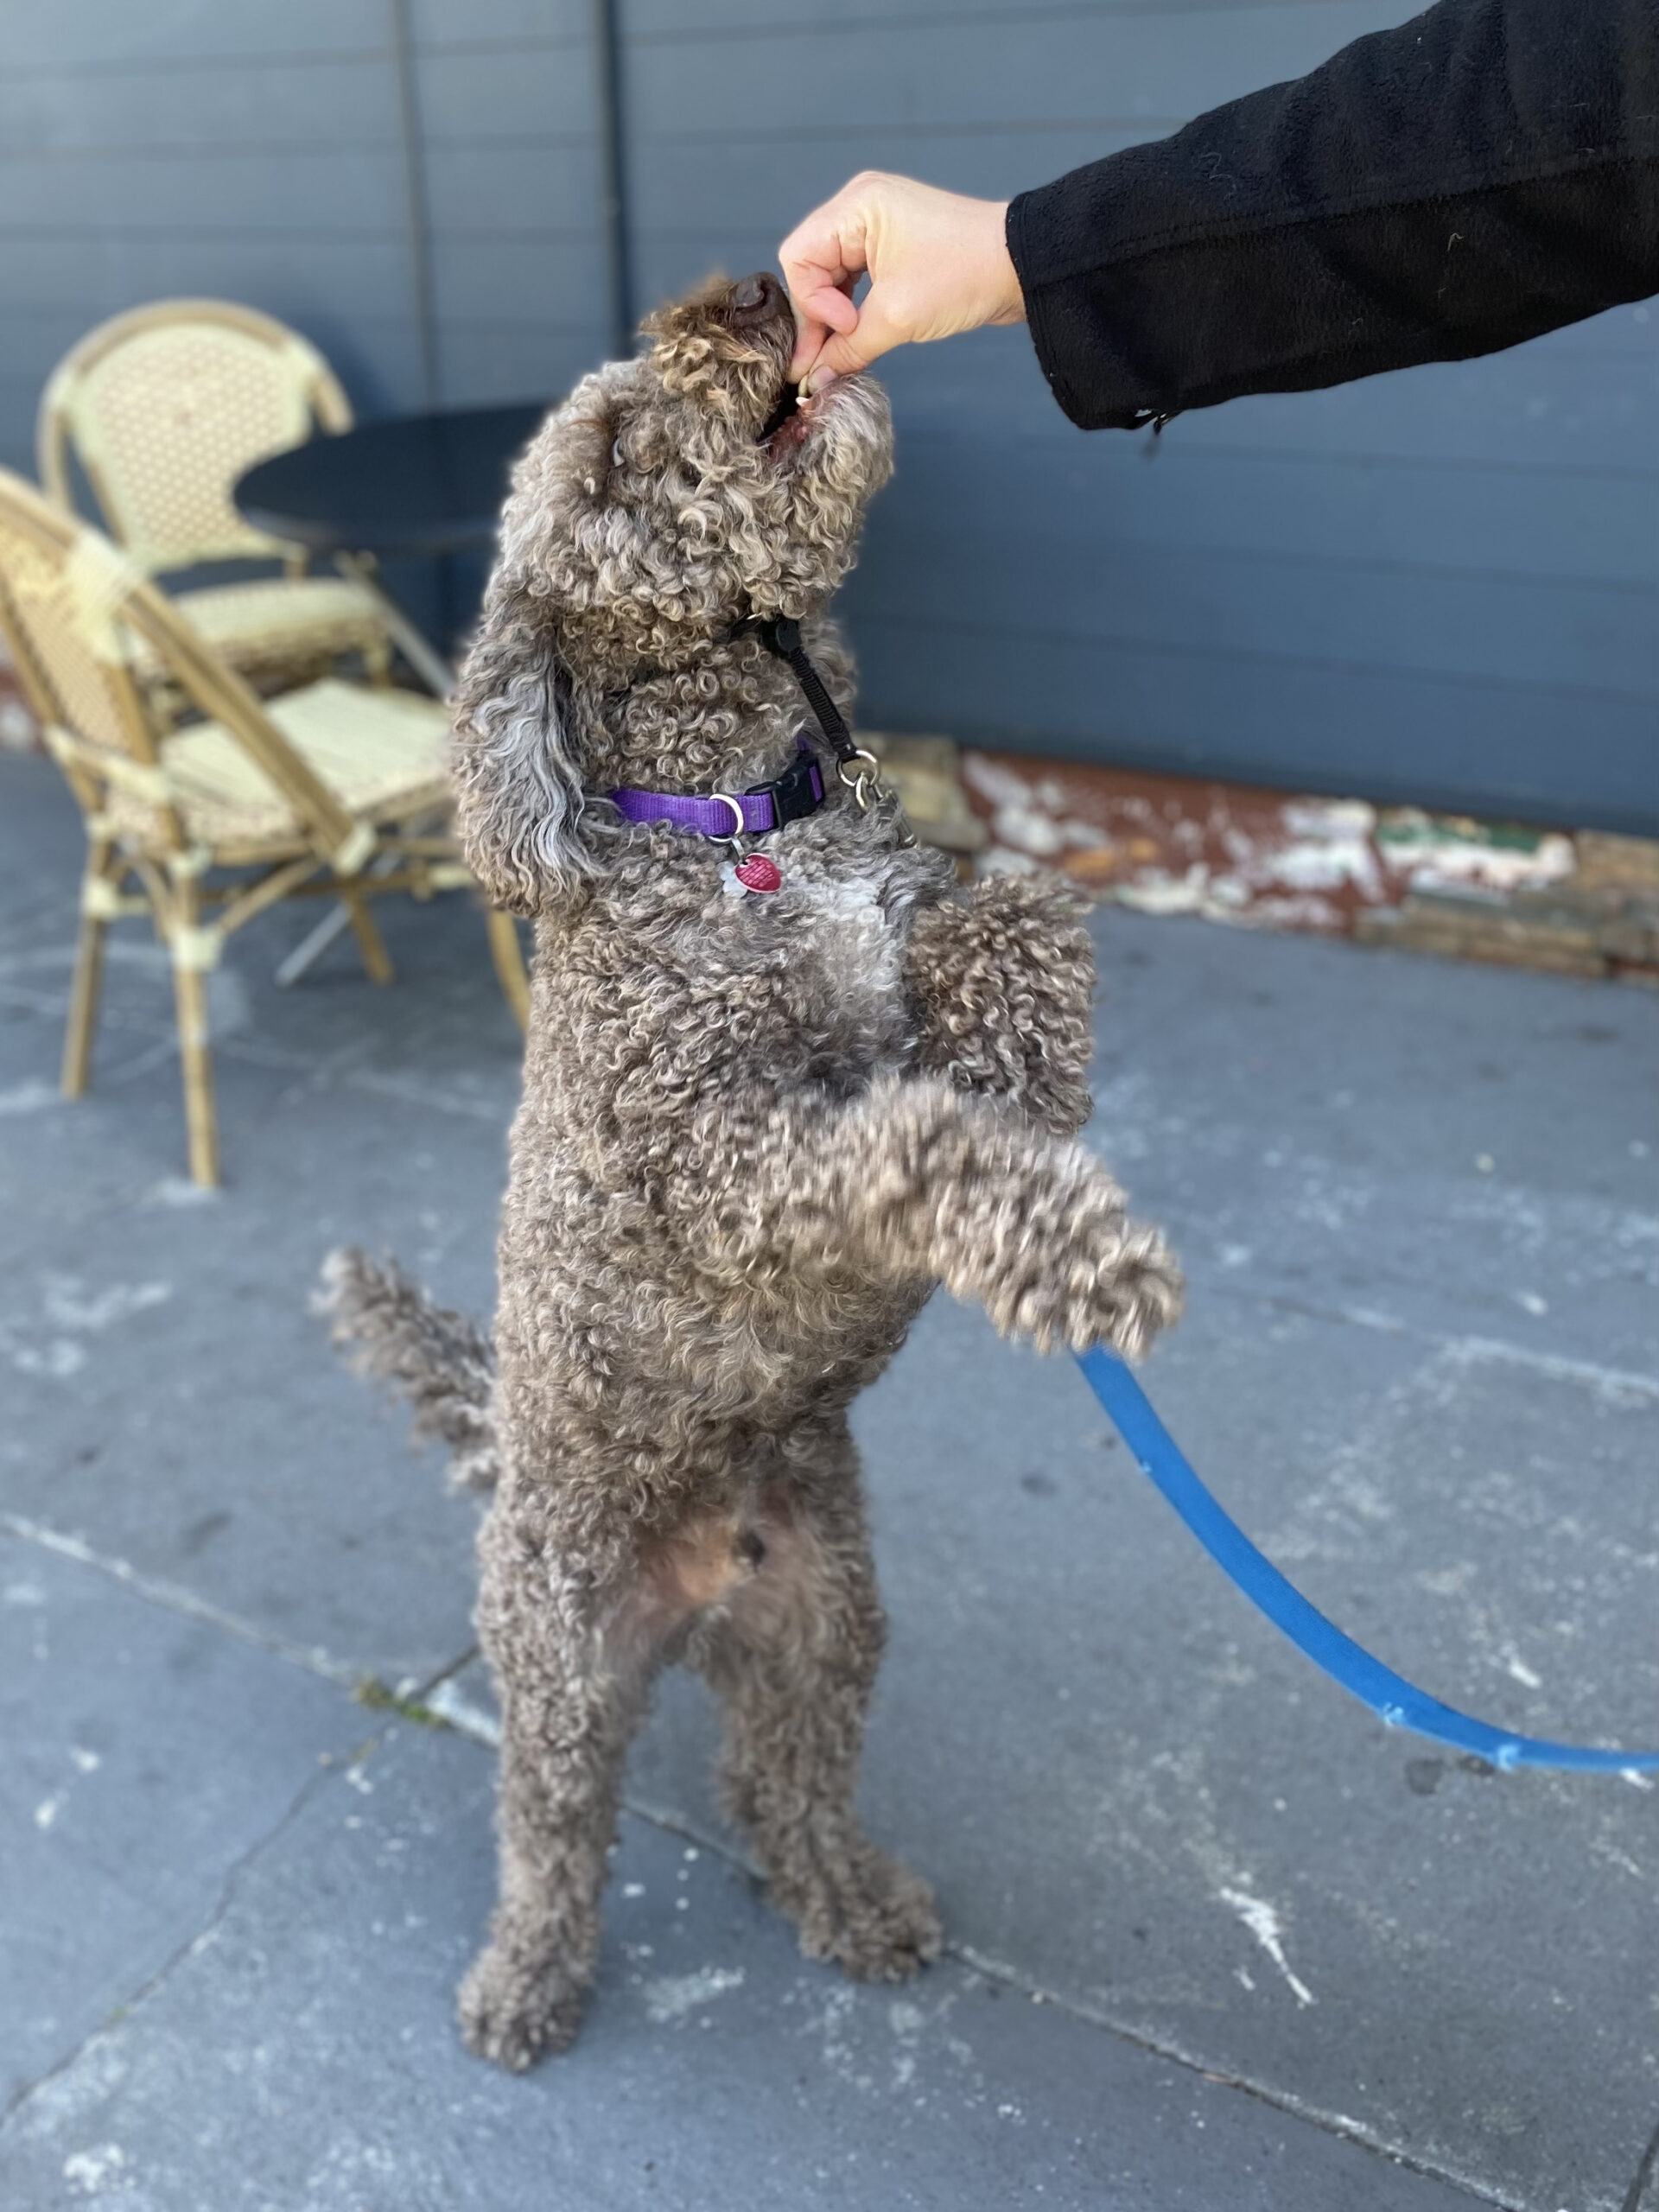 Lagotto Romagnolo Standing On His Hind Legs Eating A Treat